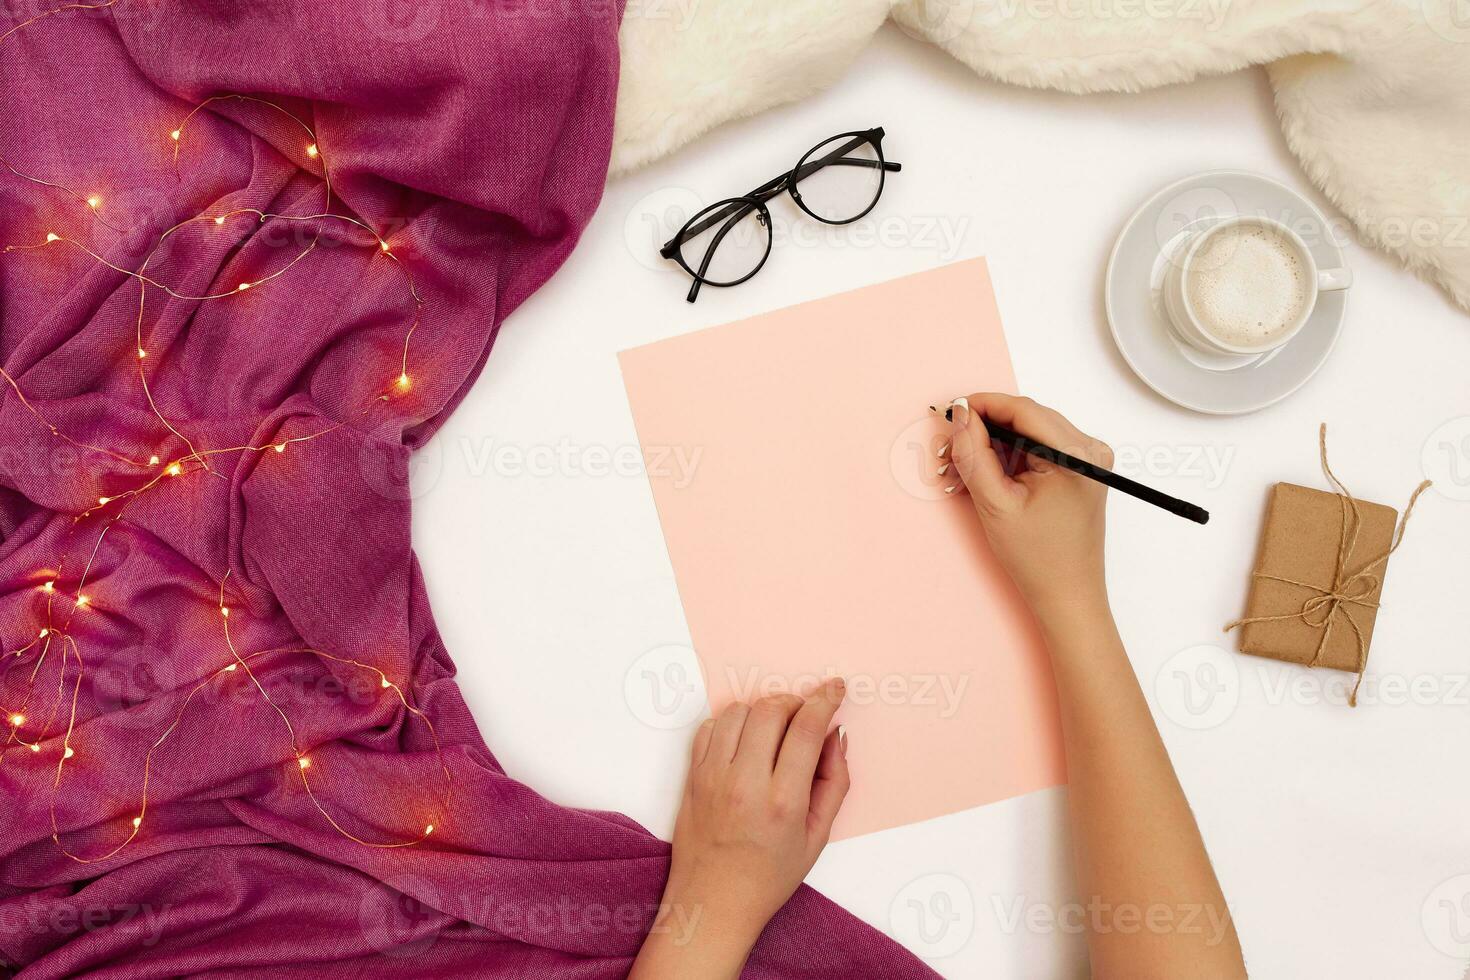 Top view of girl's hand writing in notepad placed on white surface with coffee cup and other items. Mock up photo